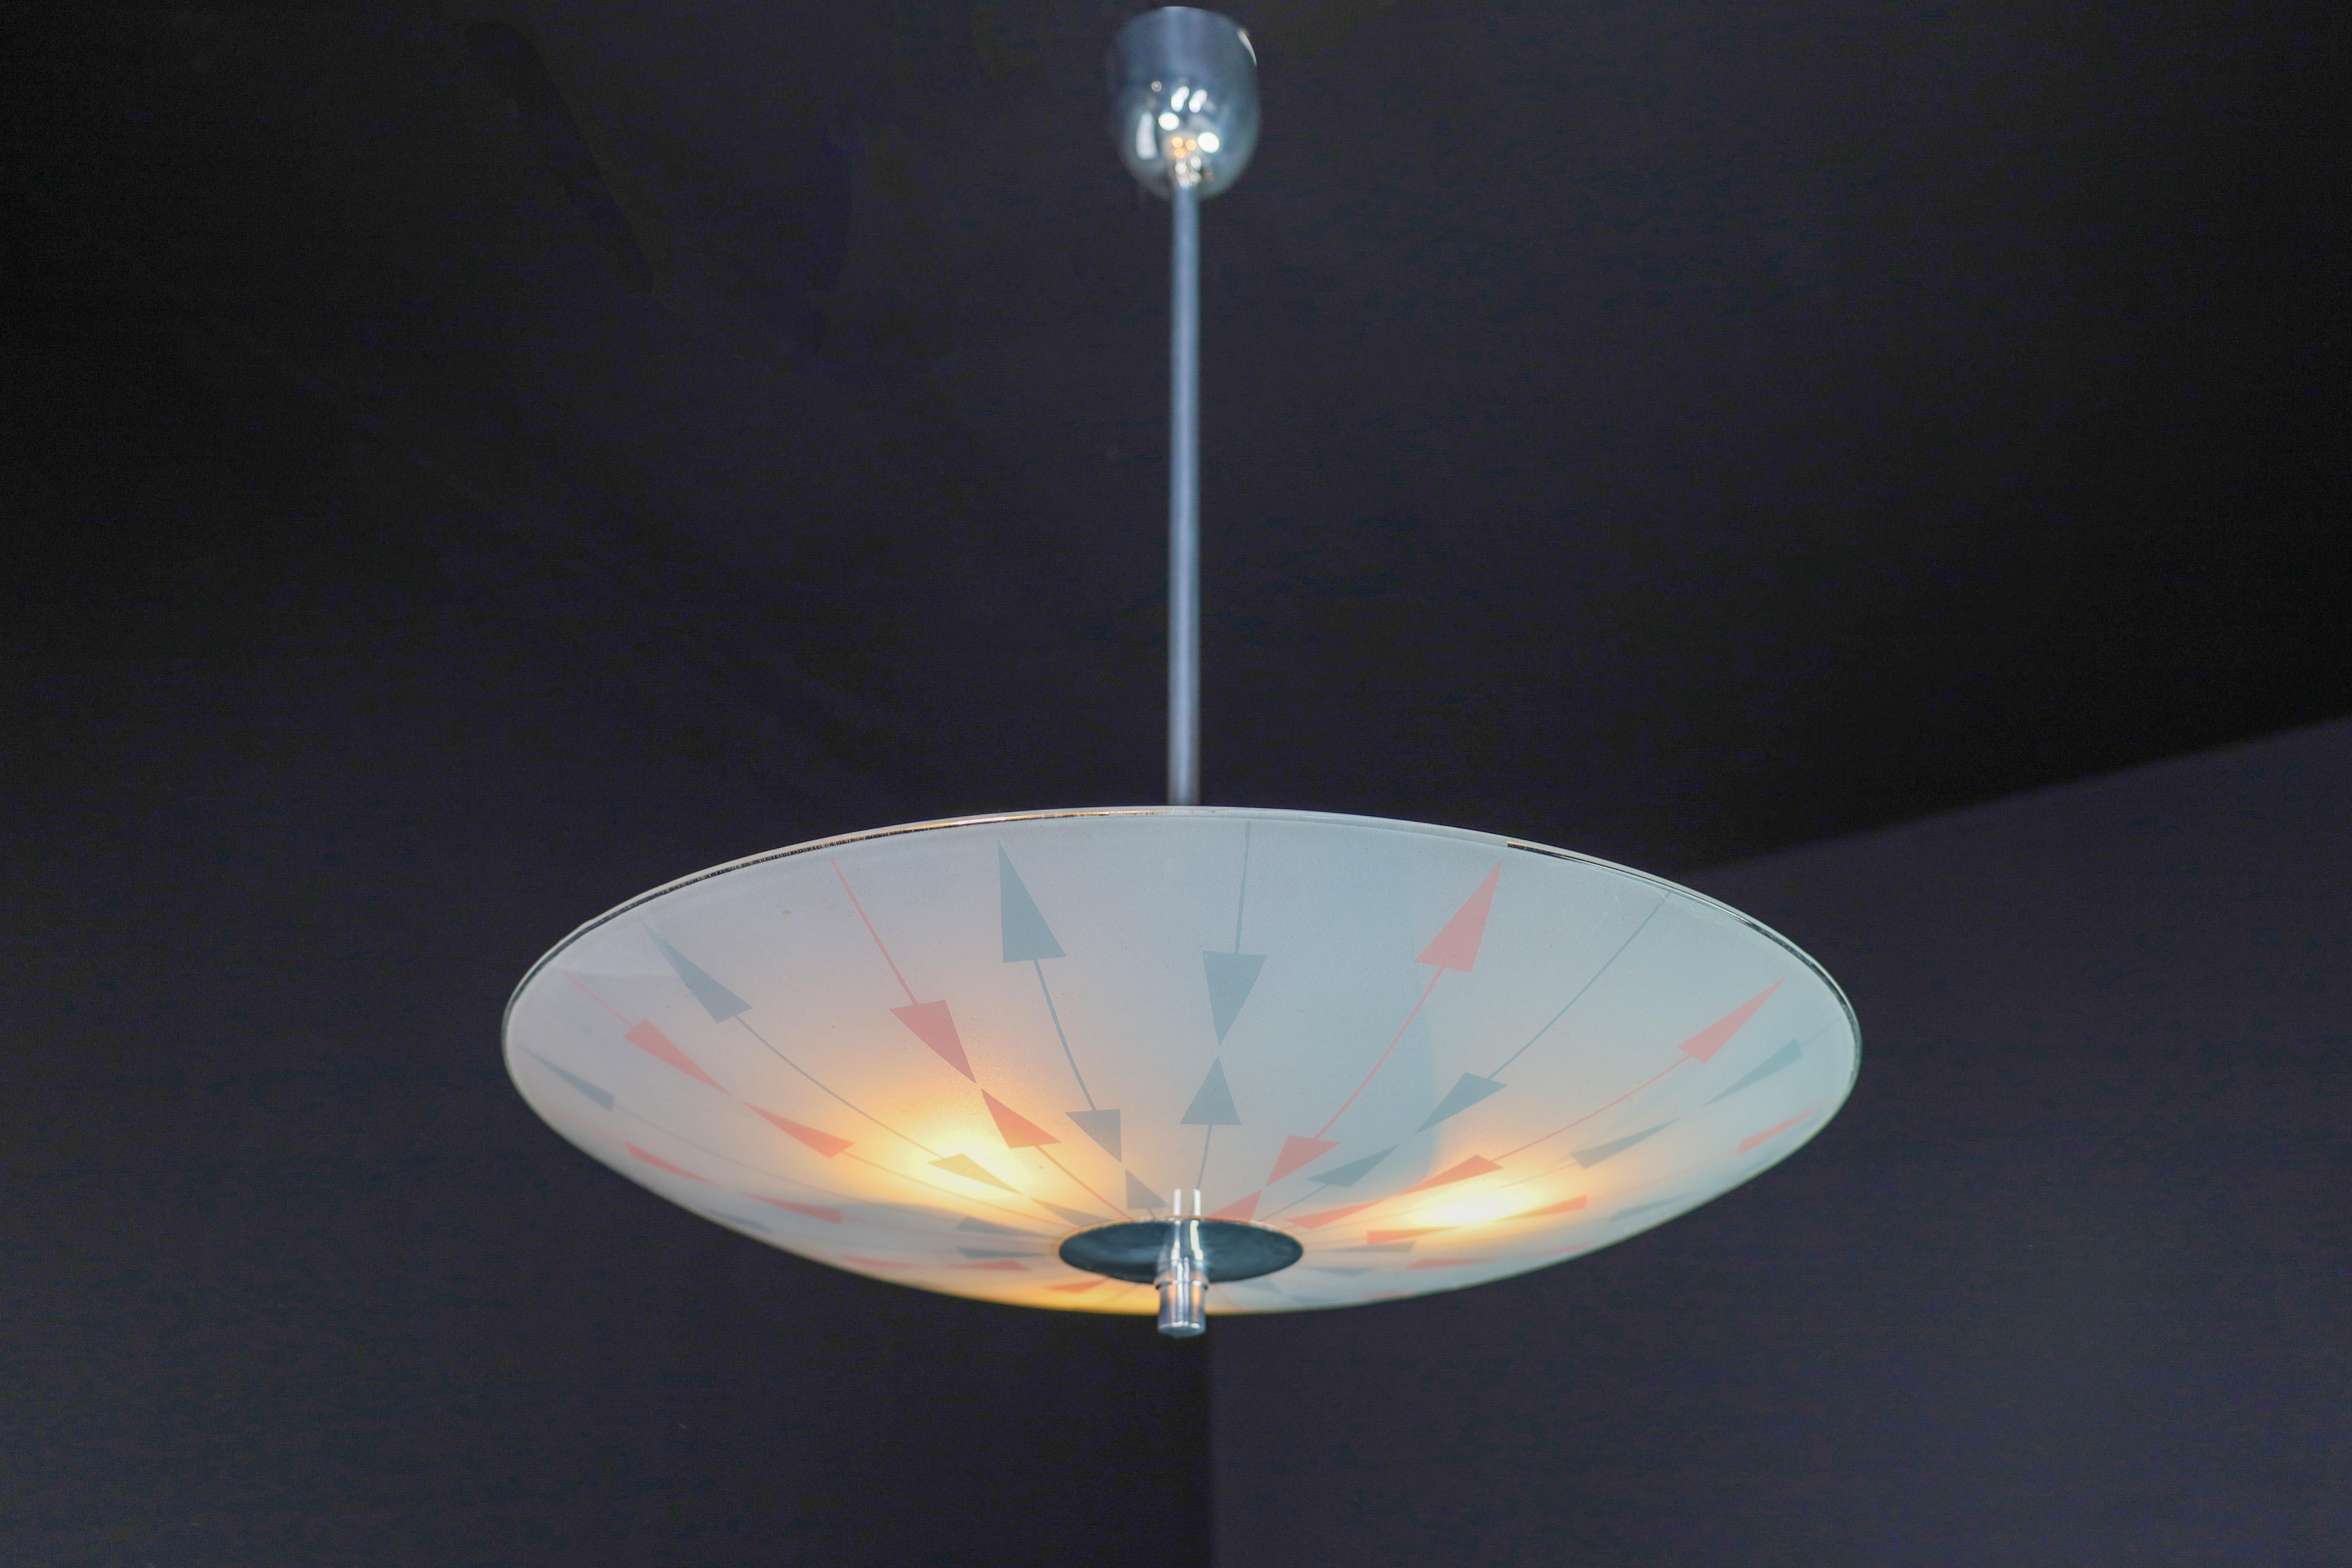 Mid-Century Modern Mid-Century Glass Hanging Pendant Lamp Brussels World Expo 1958 (5116) For Sale